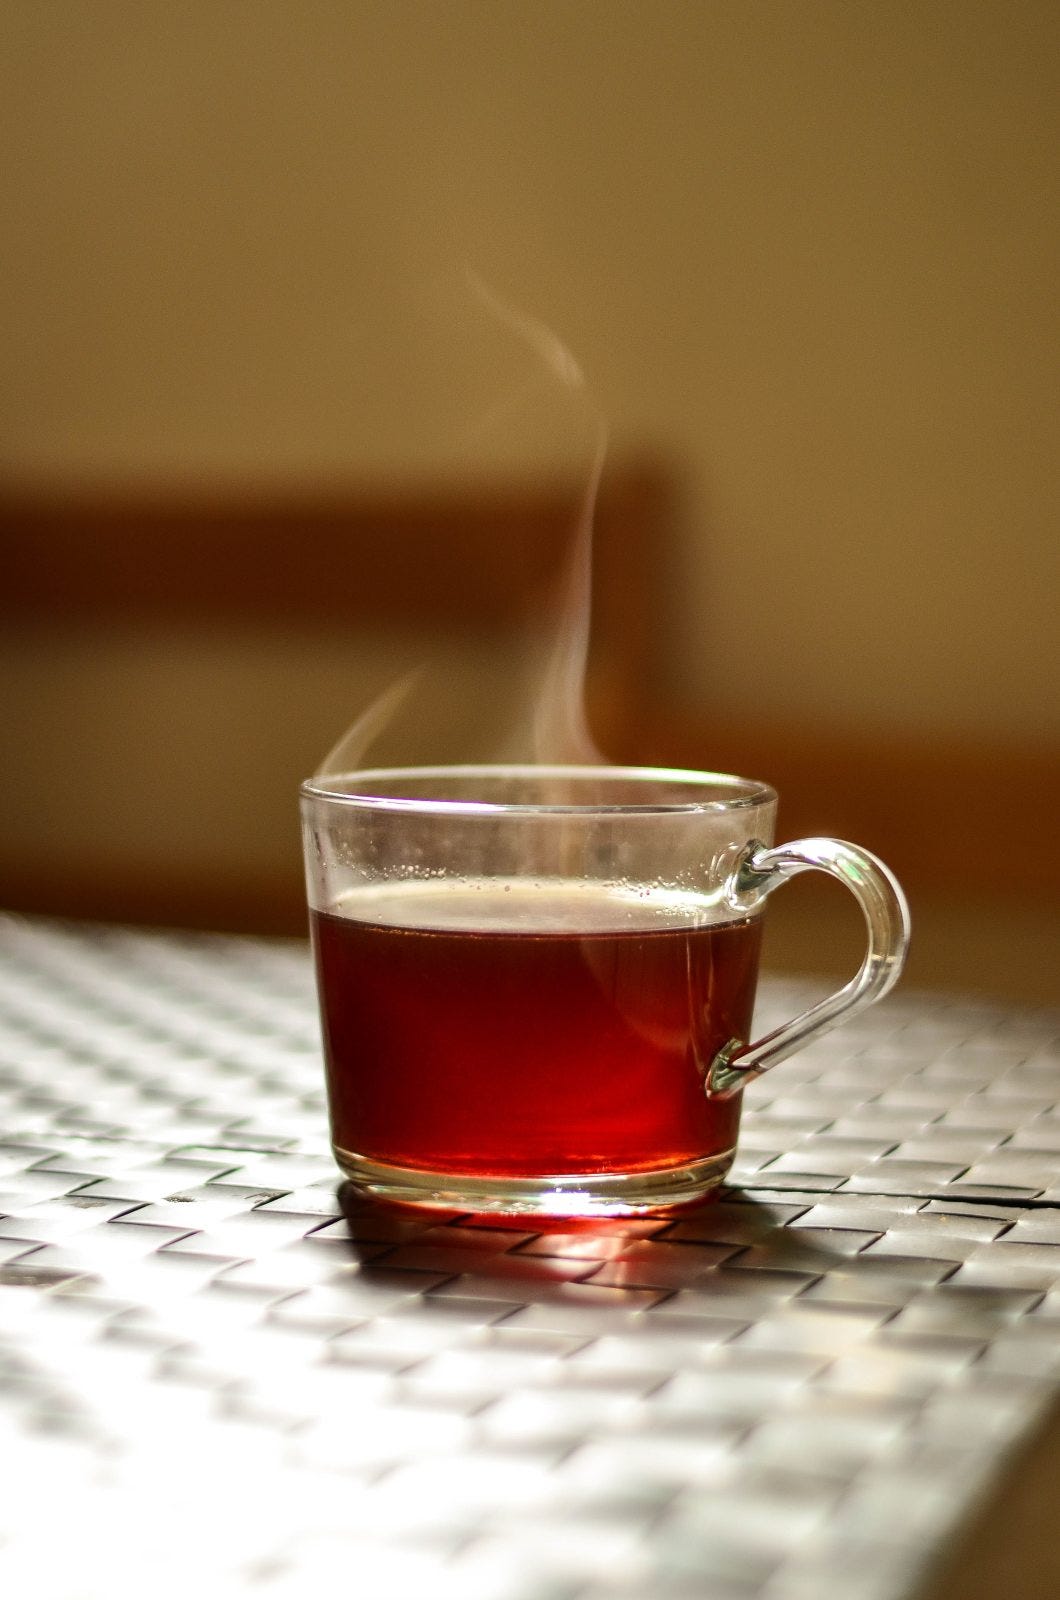 tea that makes you lose weight fast